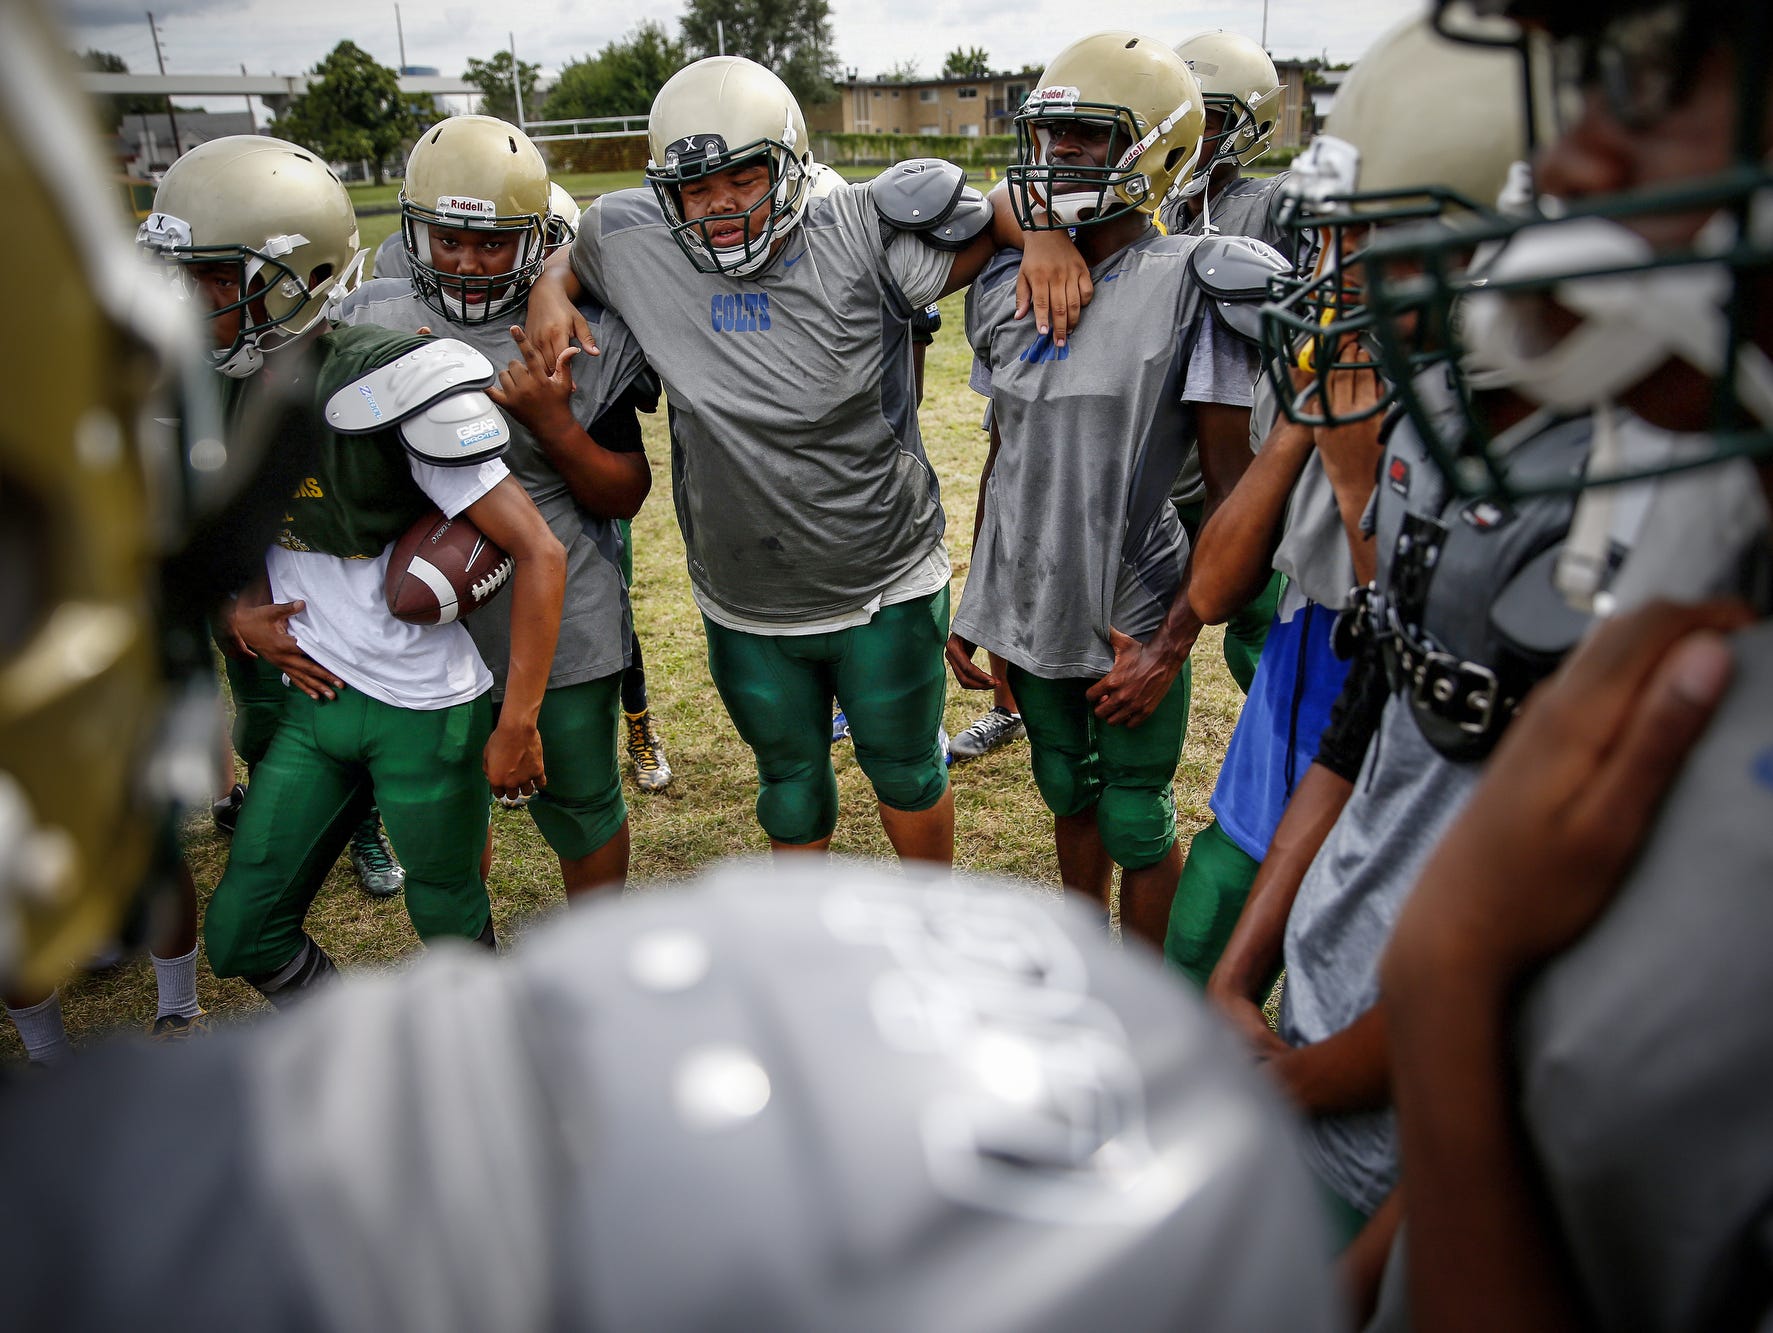 Exhausted Crispus Attucks players lean on each others shoulders during a team huddle during practice at Alonzo Watford Athletic Field on Aug. 17, 2016.